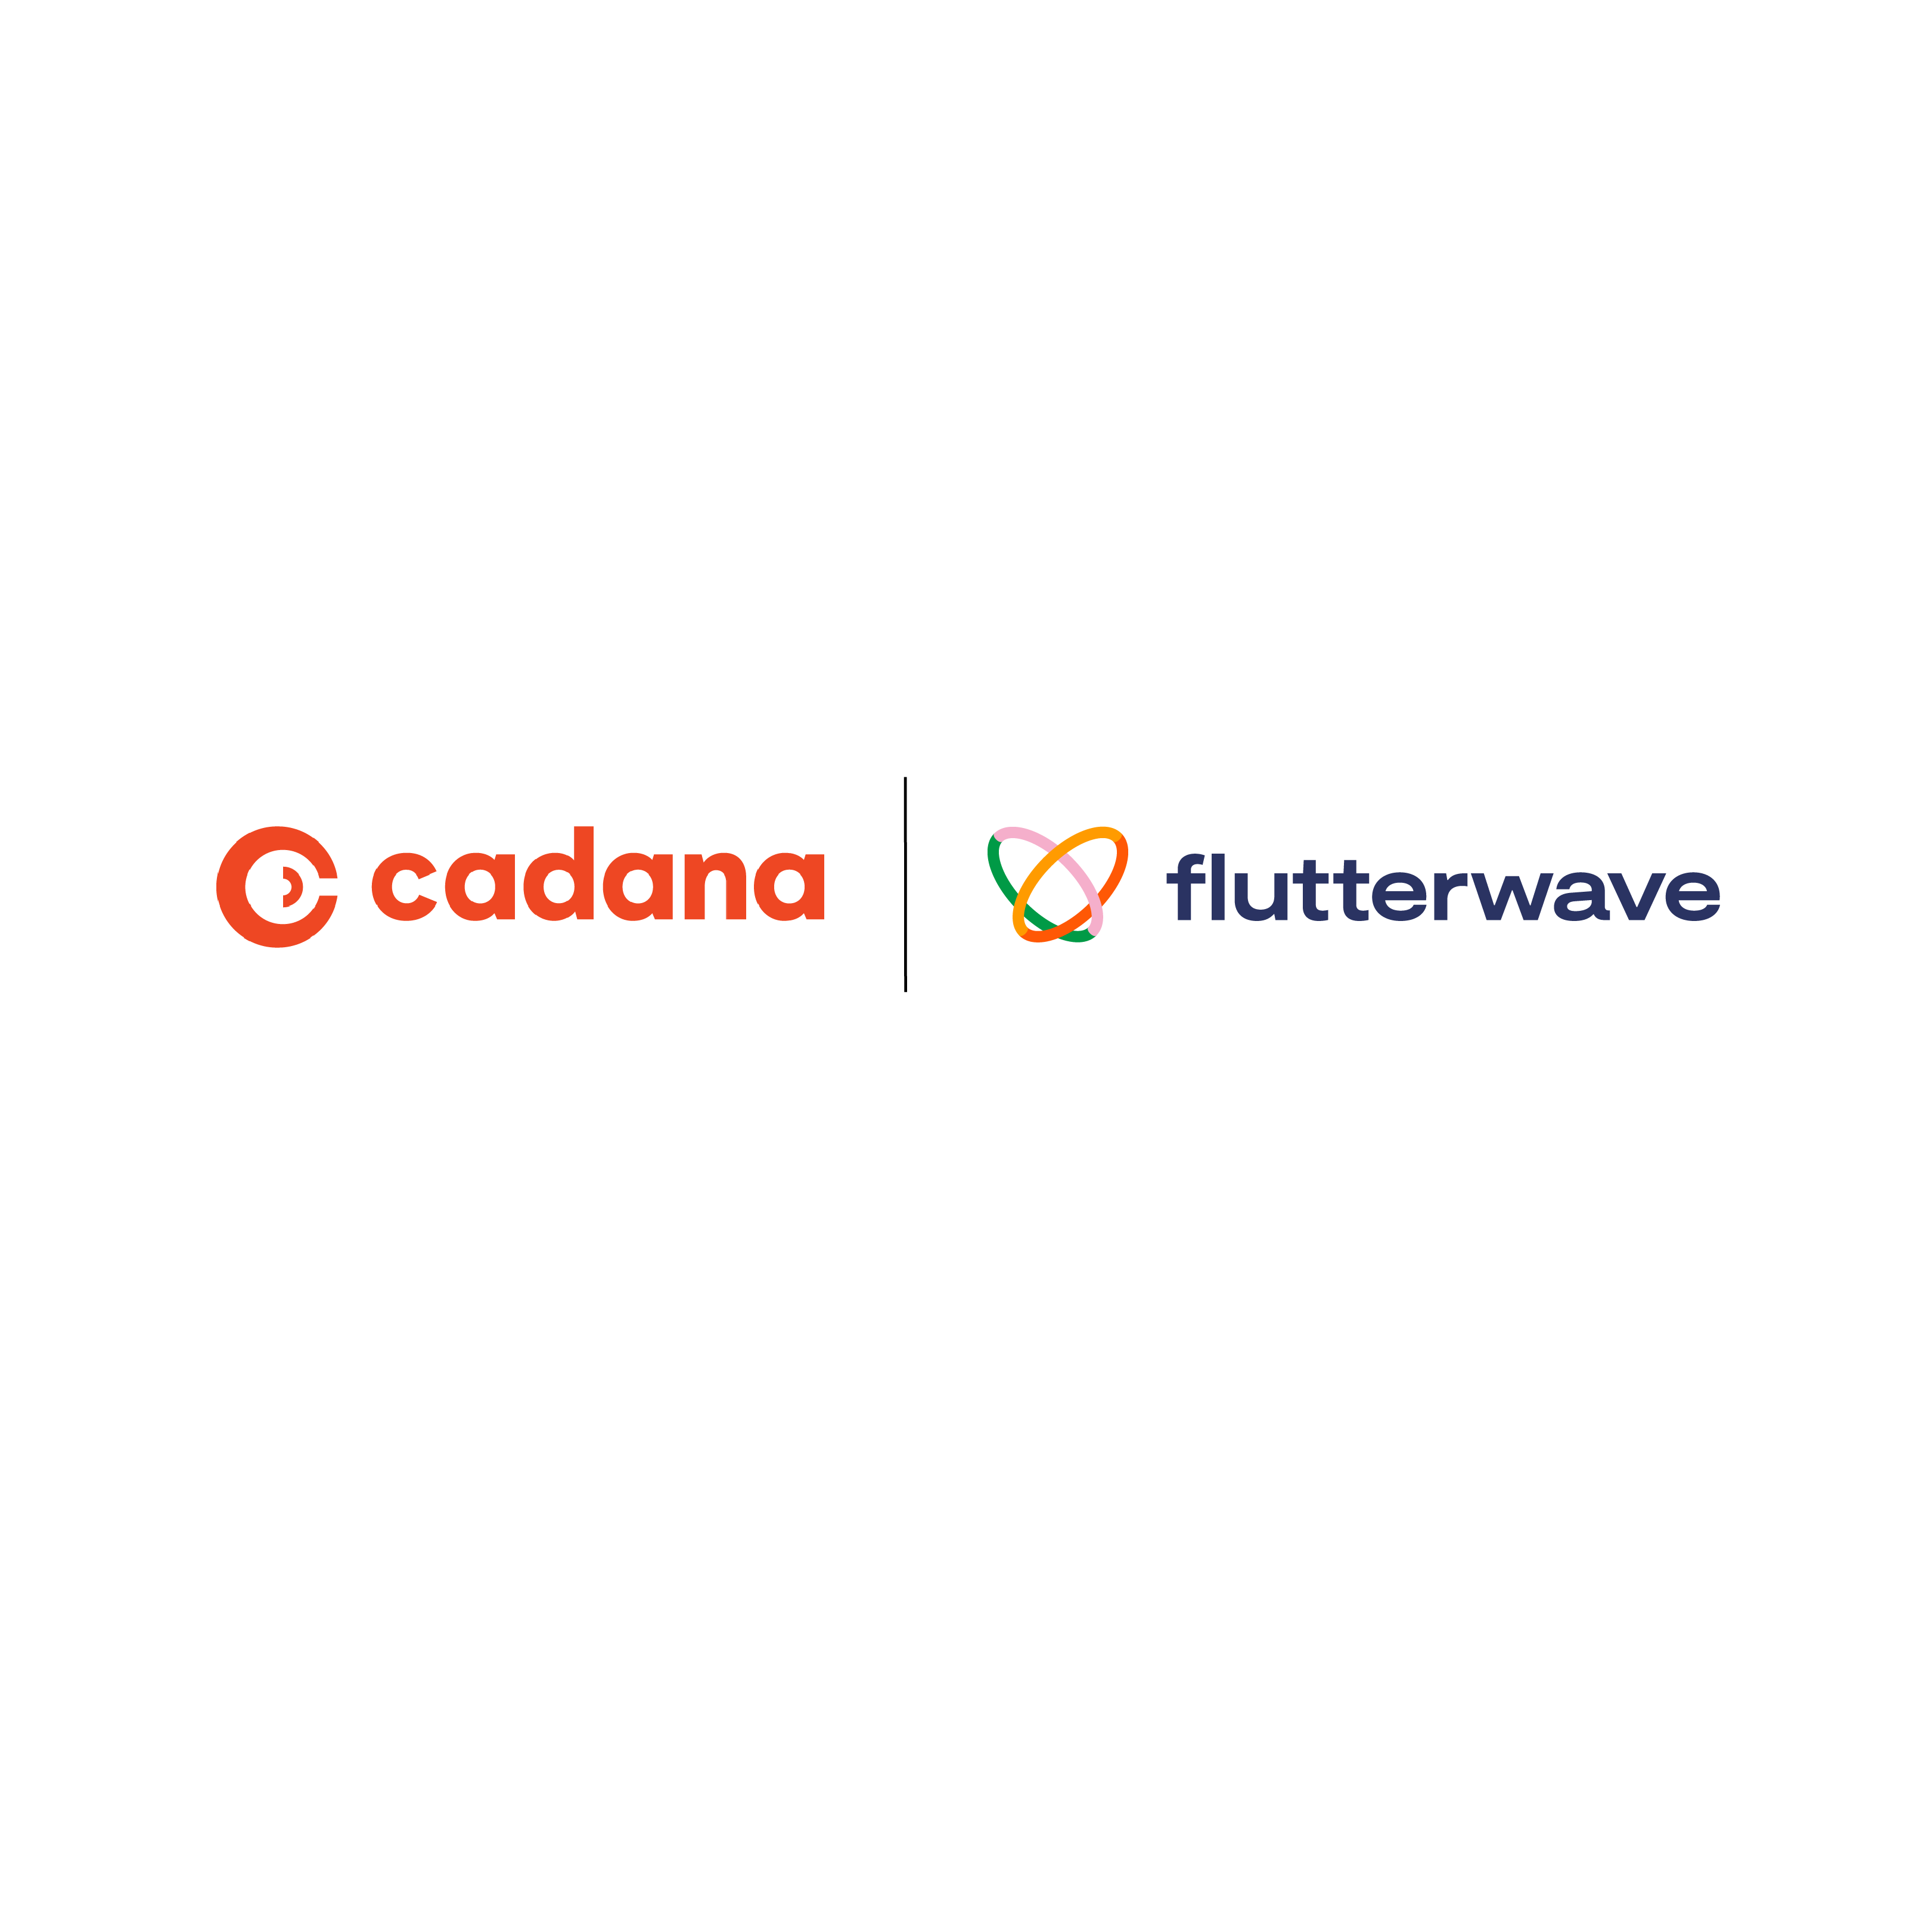 Salary On-Demand Startup, Cadana, Teams up with Flutterwave to Expand into Nigeria